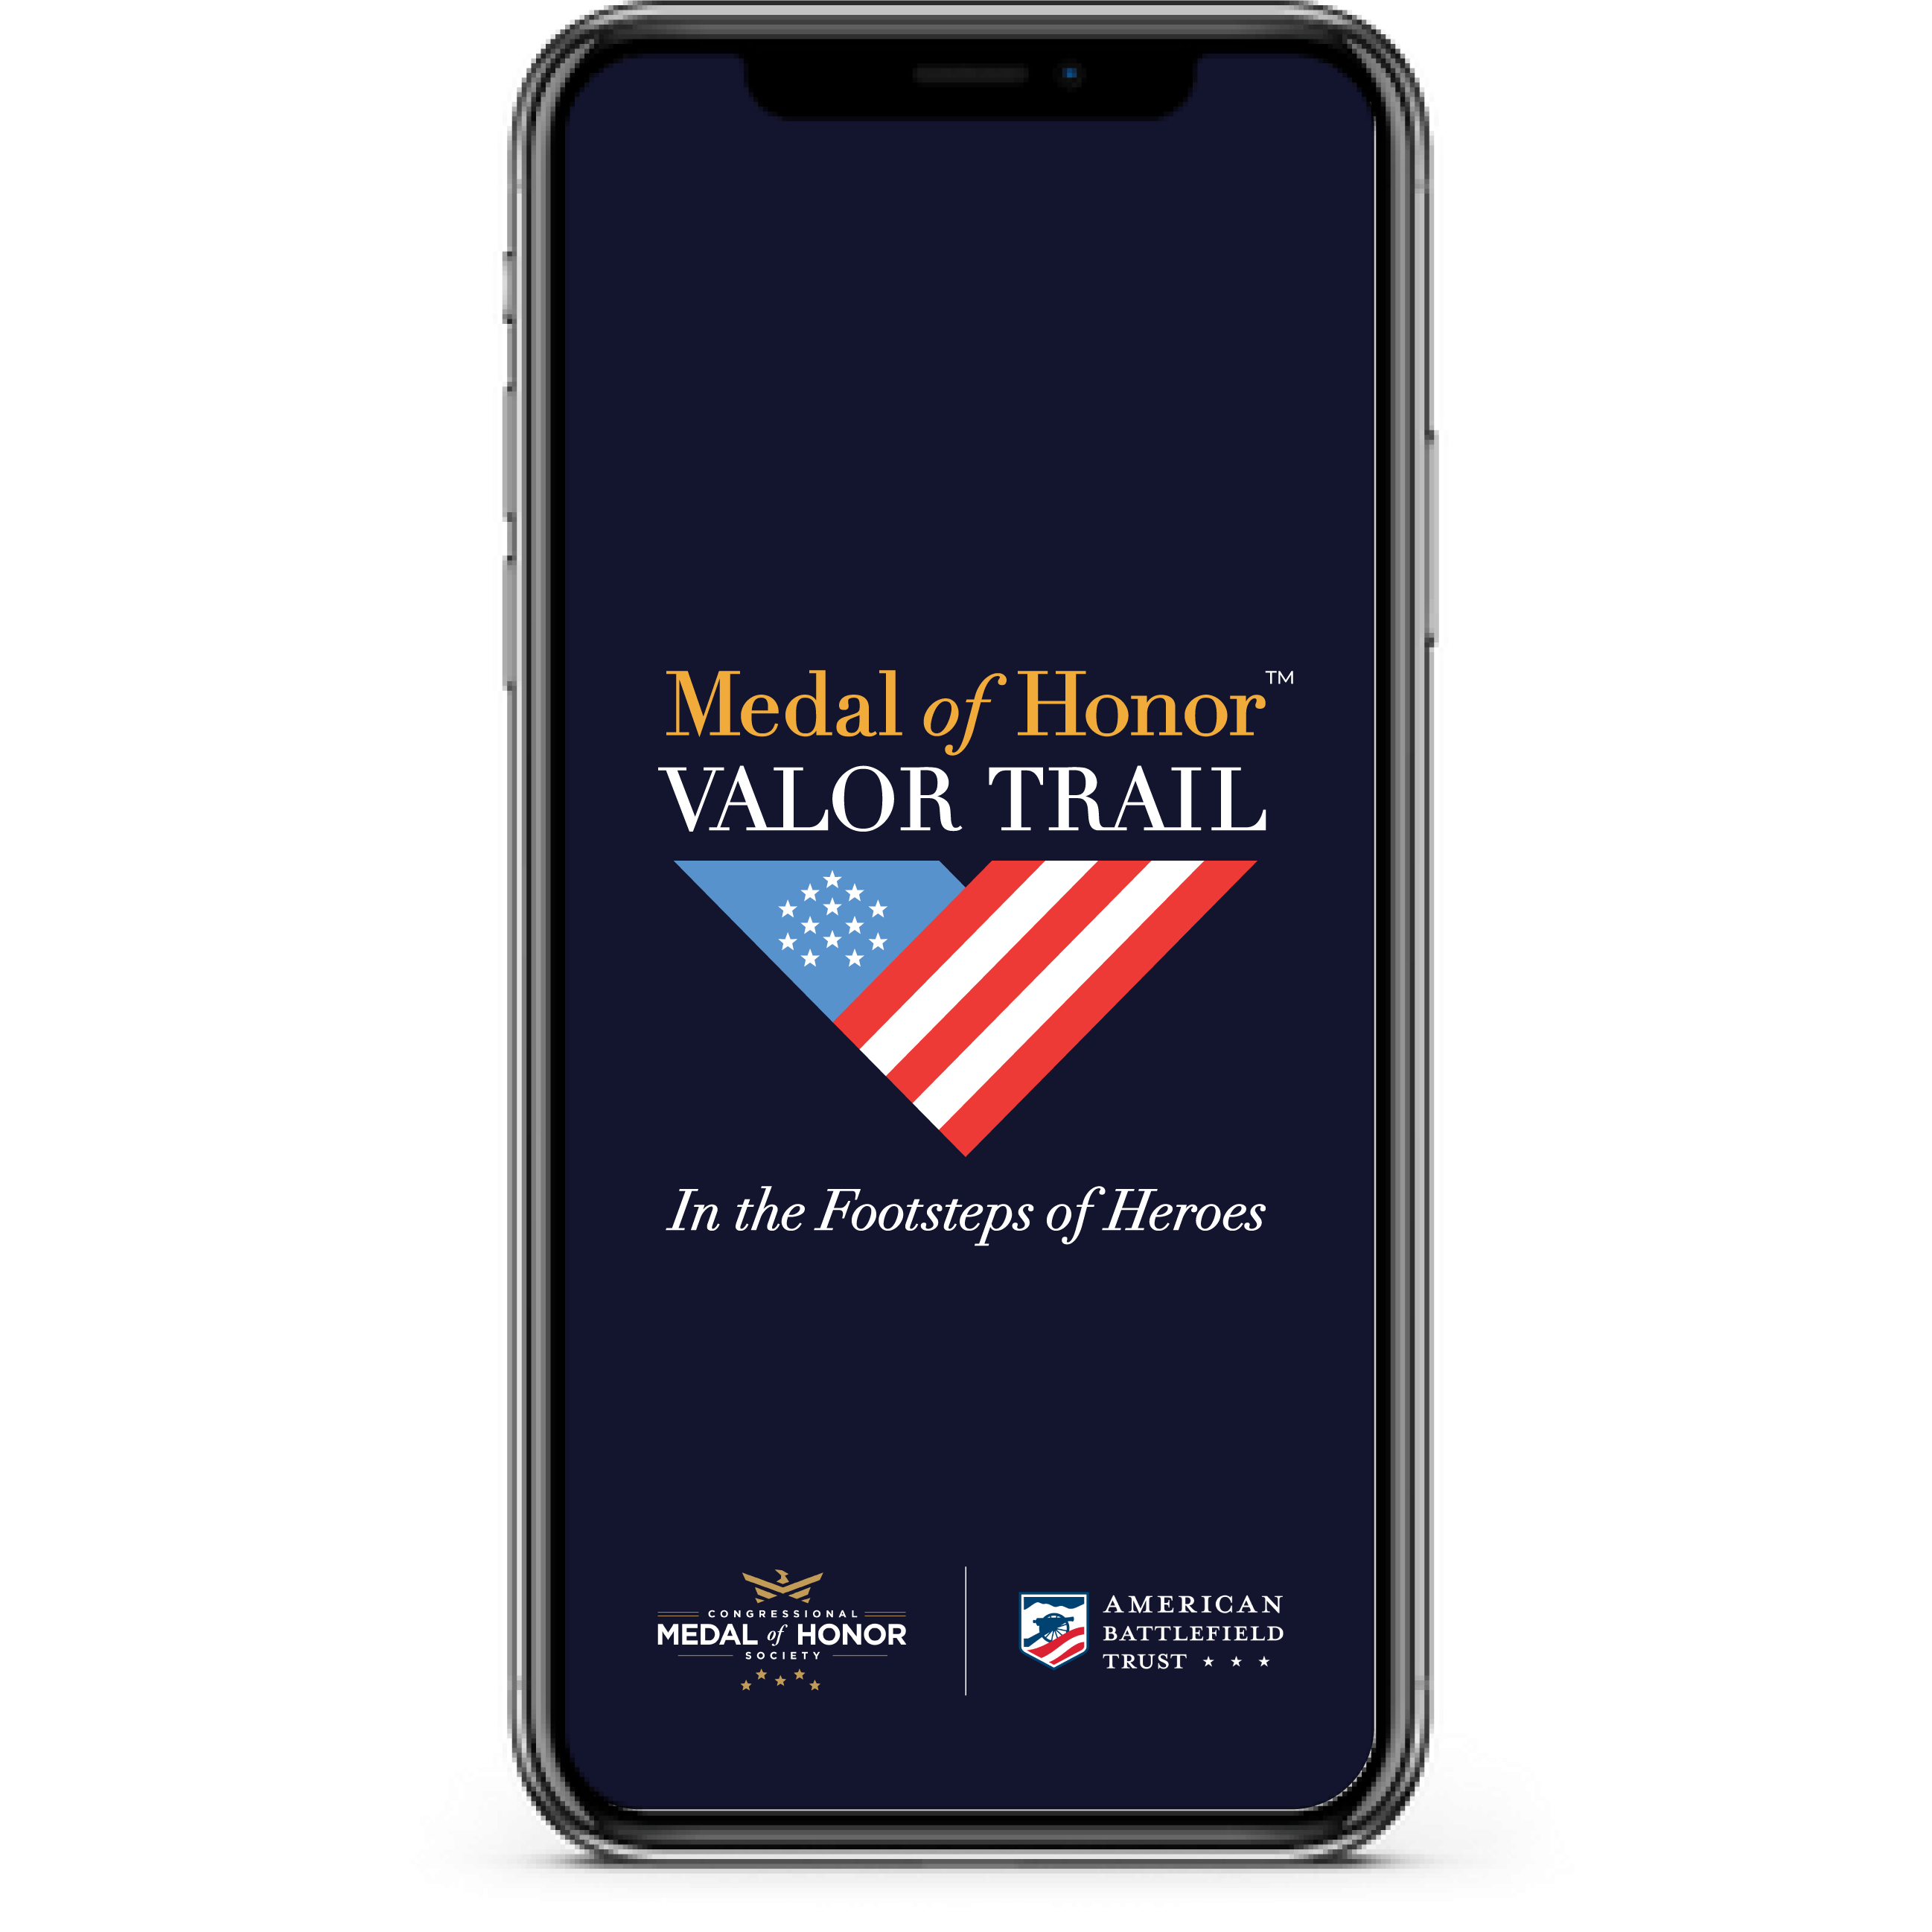 A cellphone showing the Medal of Honor Valor Trail logo 